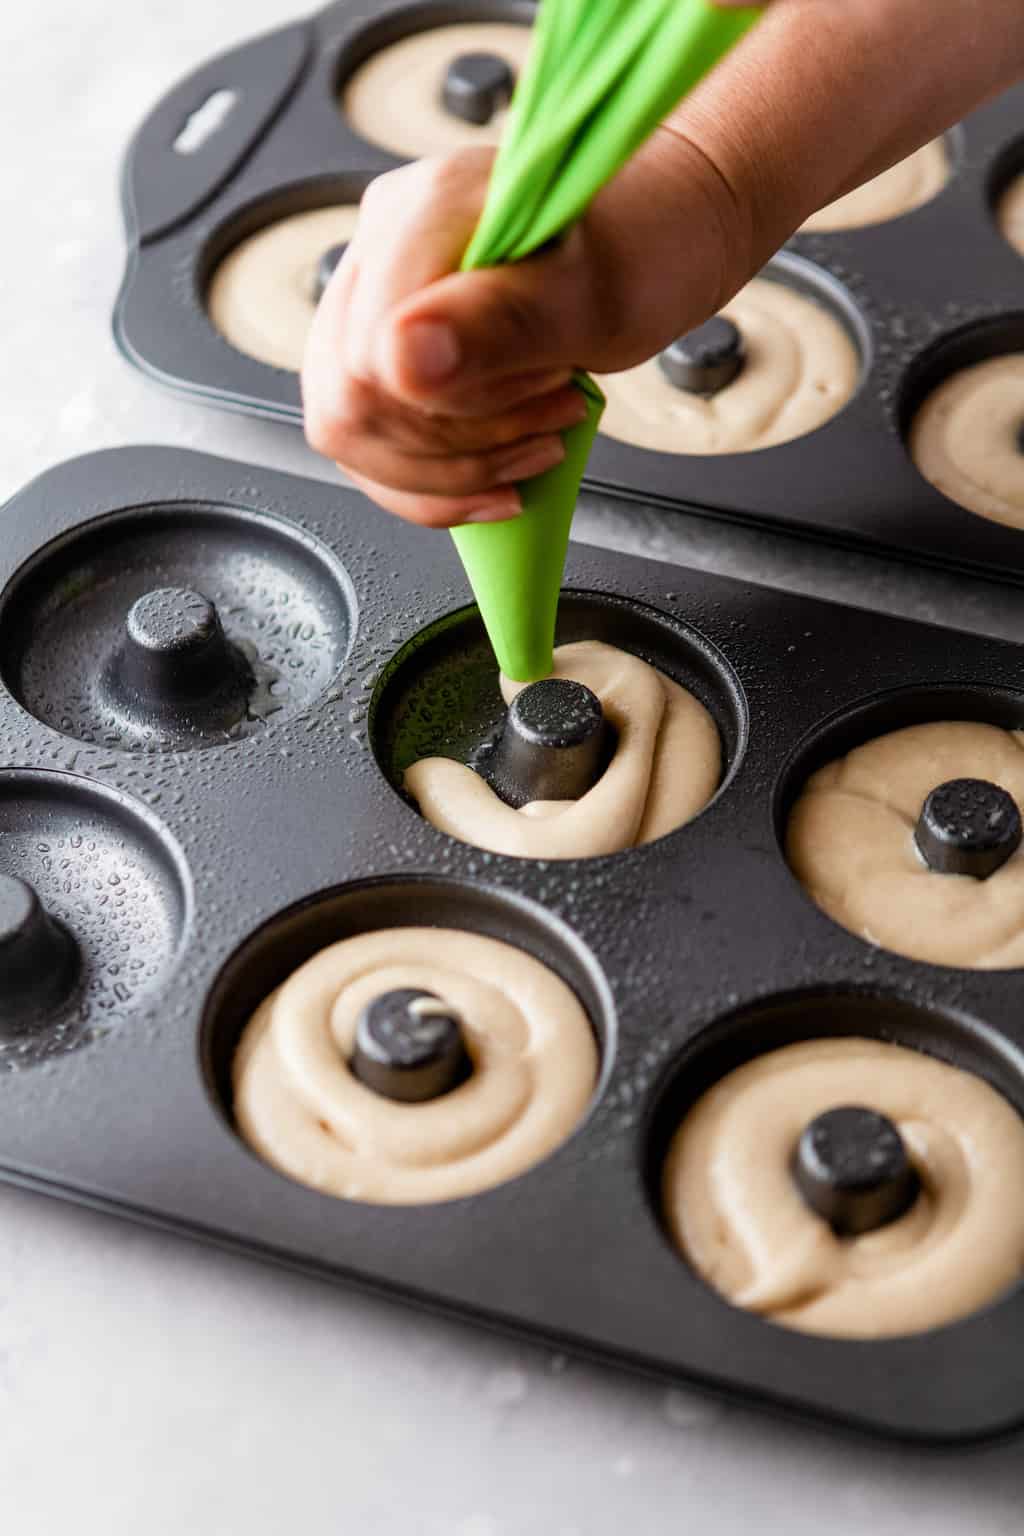 pipe the donut batter into the donut pan